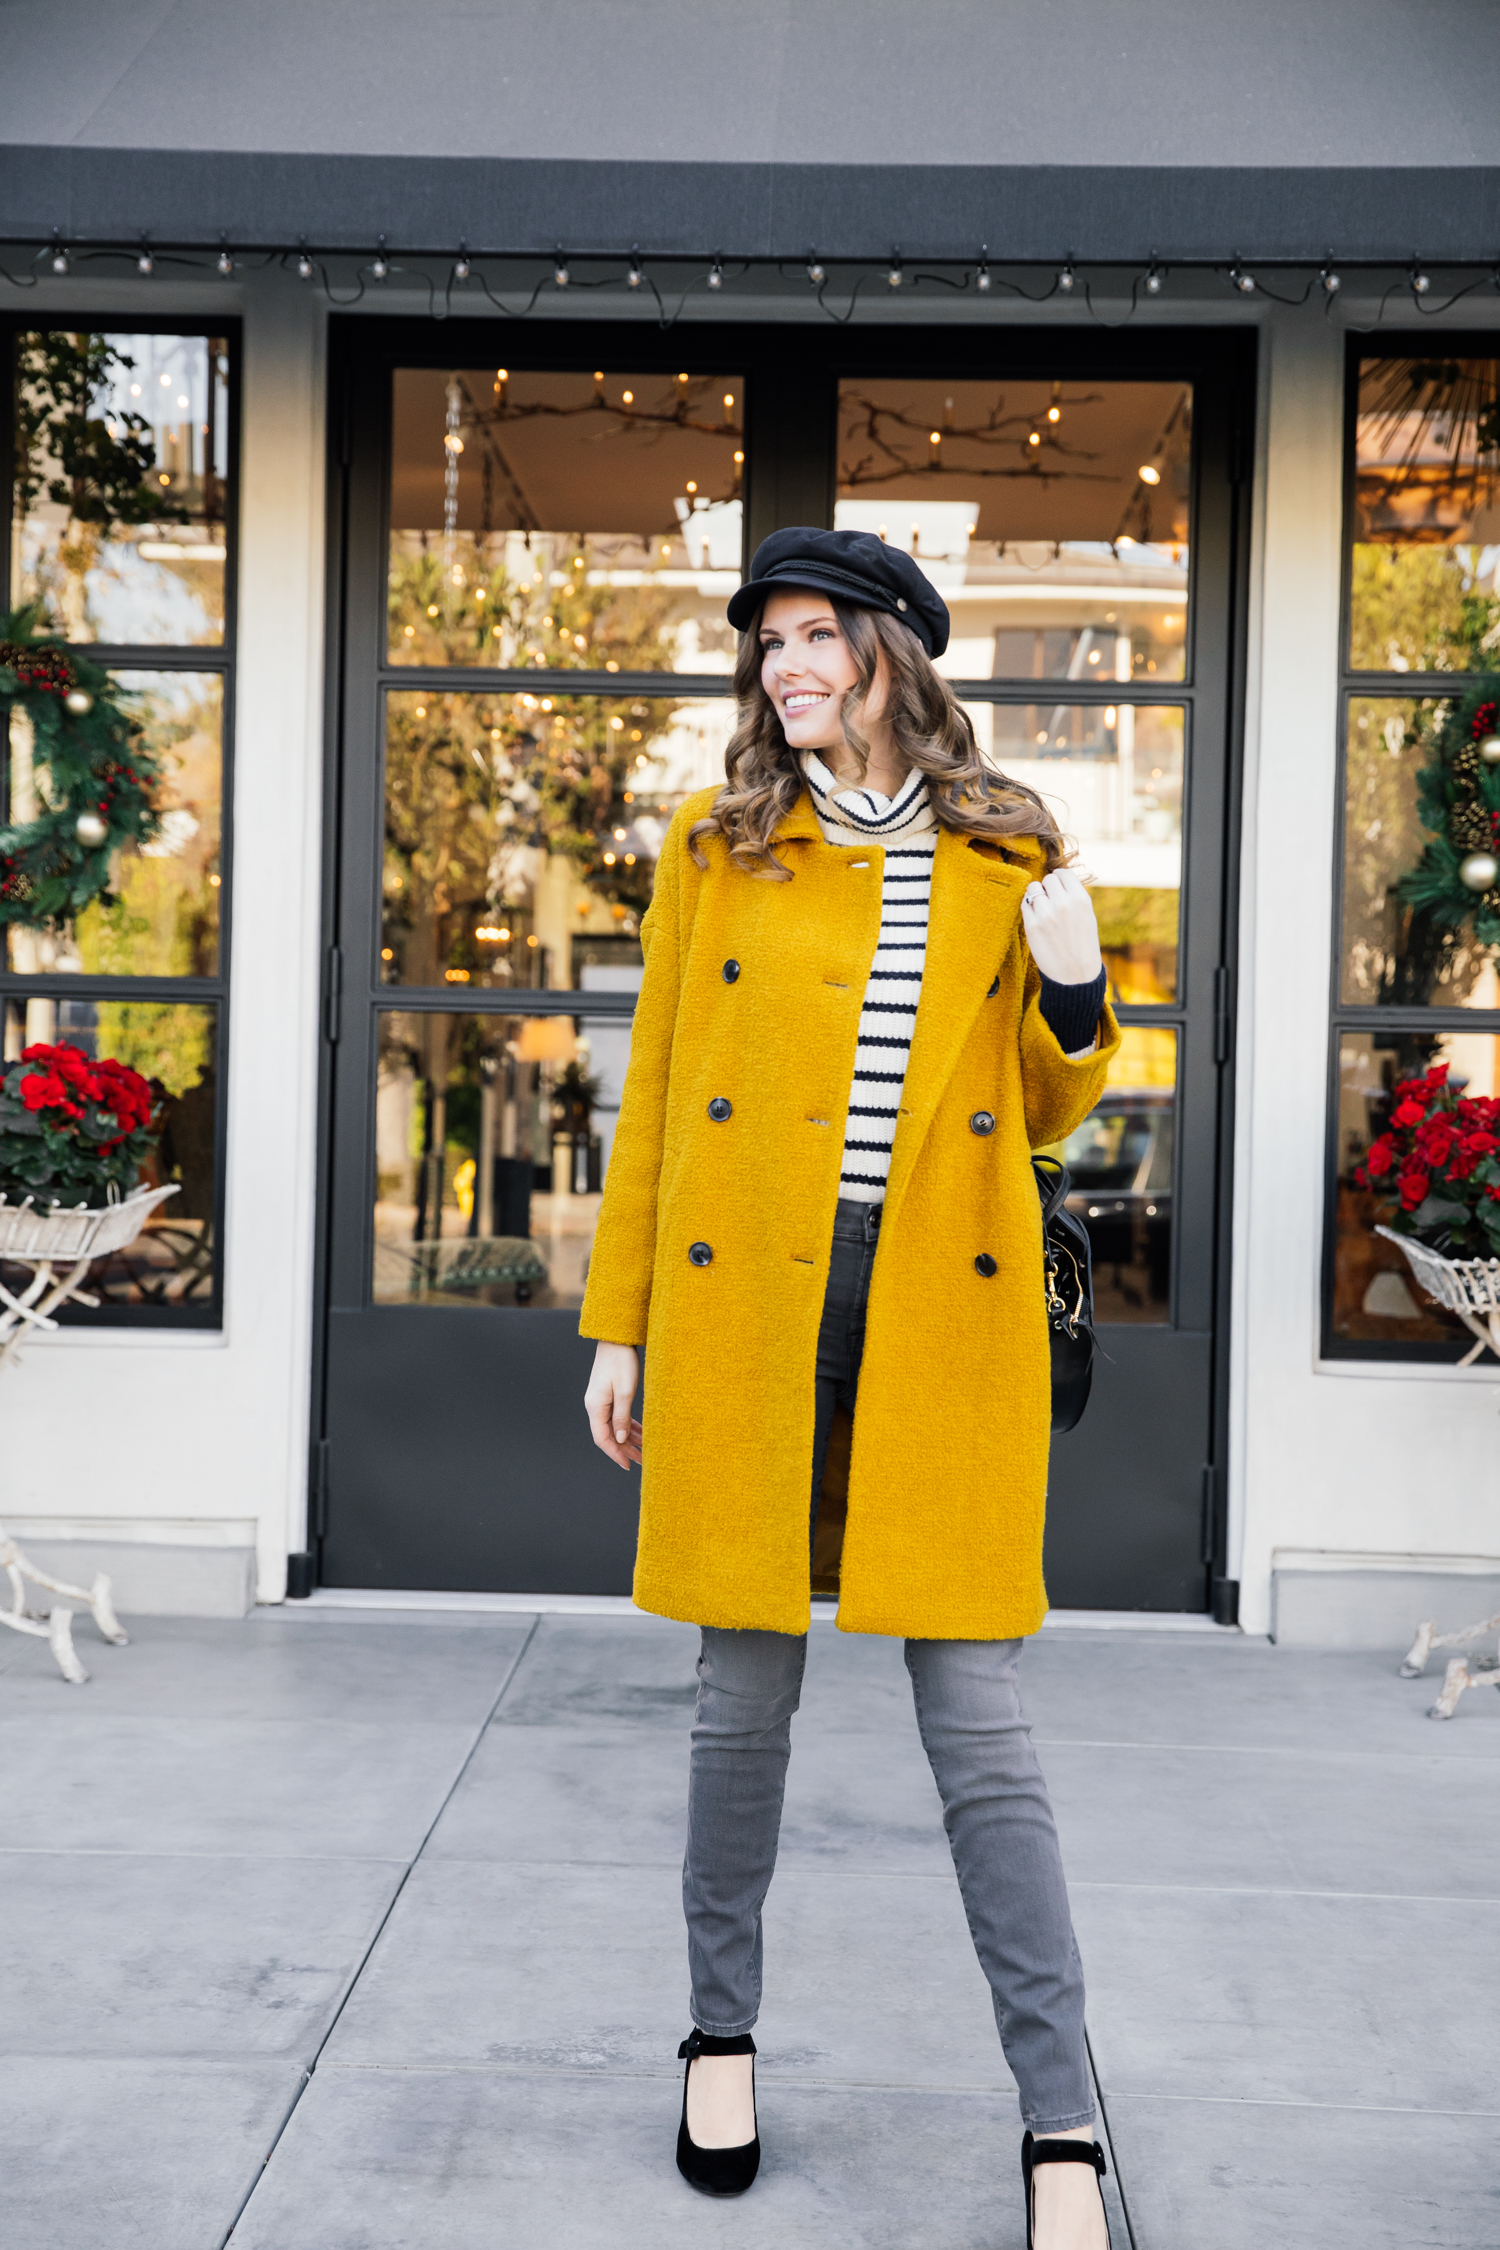 Alyssa Campanella of The A List blog shares her goals for 2018 wearing Madewell Double Breasted Coat and Clare V Alistair bag